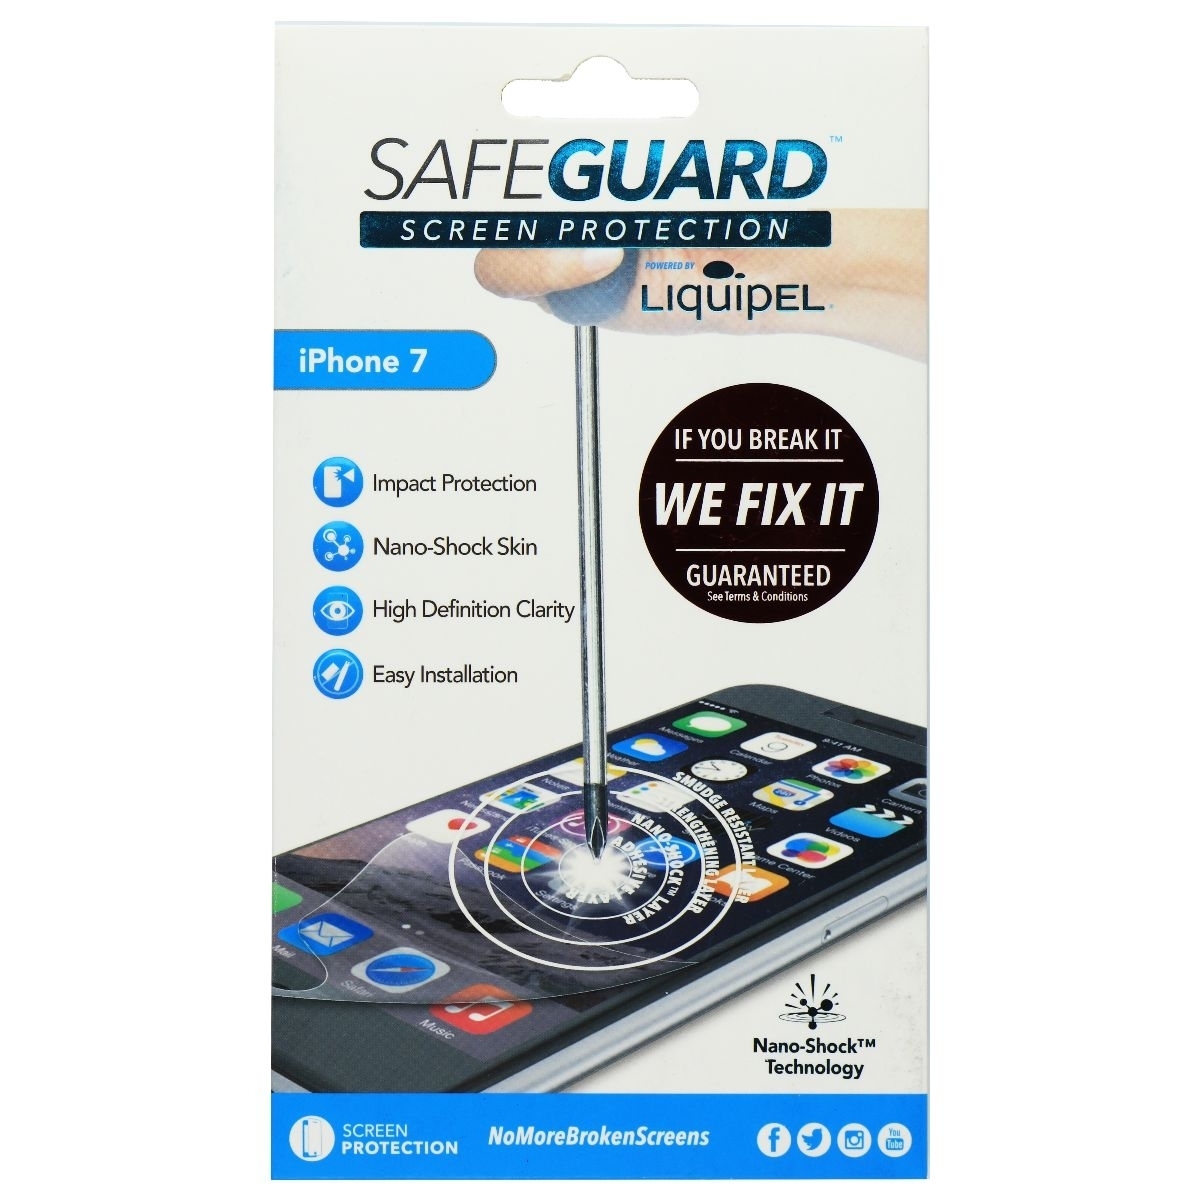 Liquipel SafeGuard Screen Protector For Apple IPhone 7 - Clear (Refurbished)